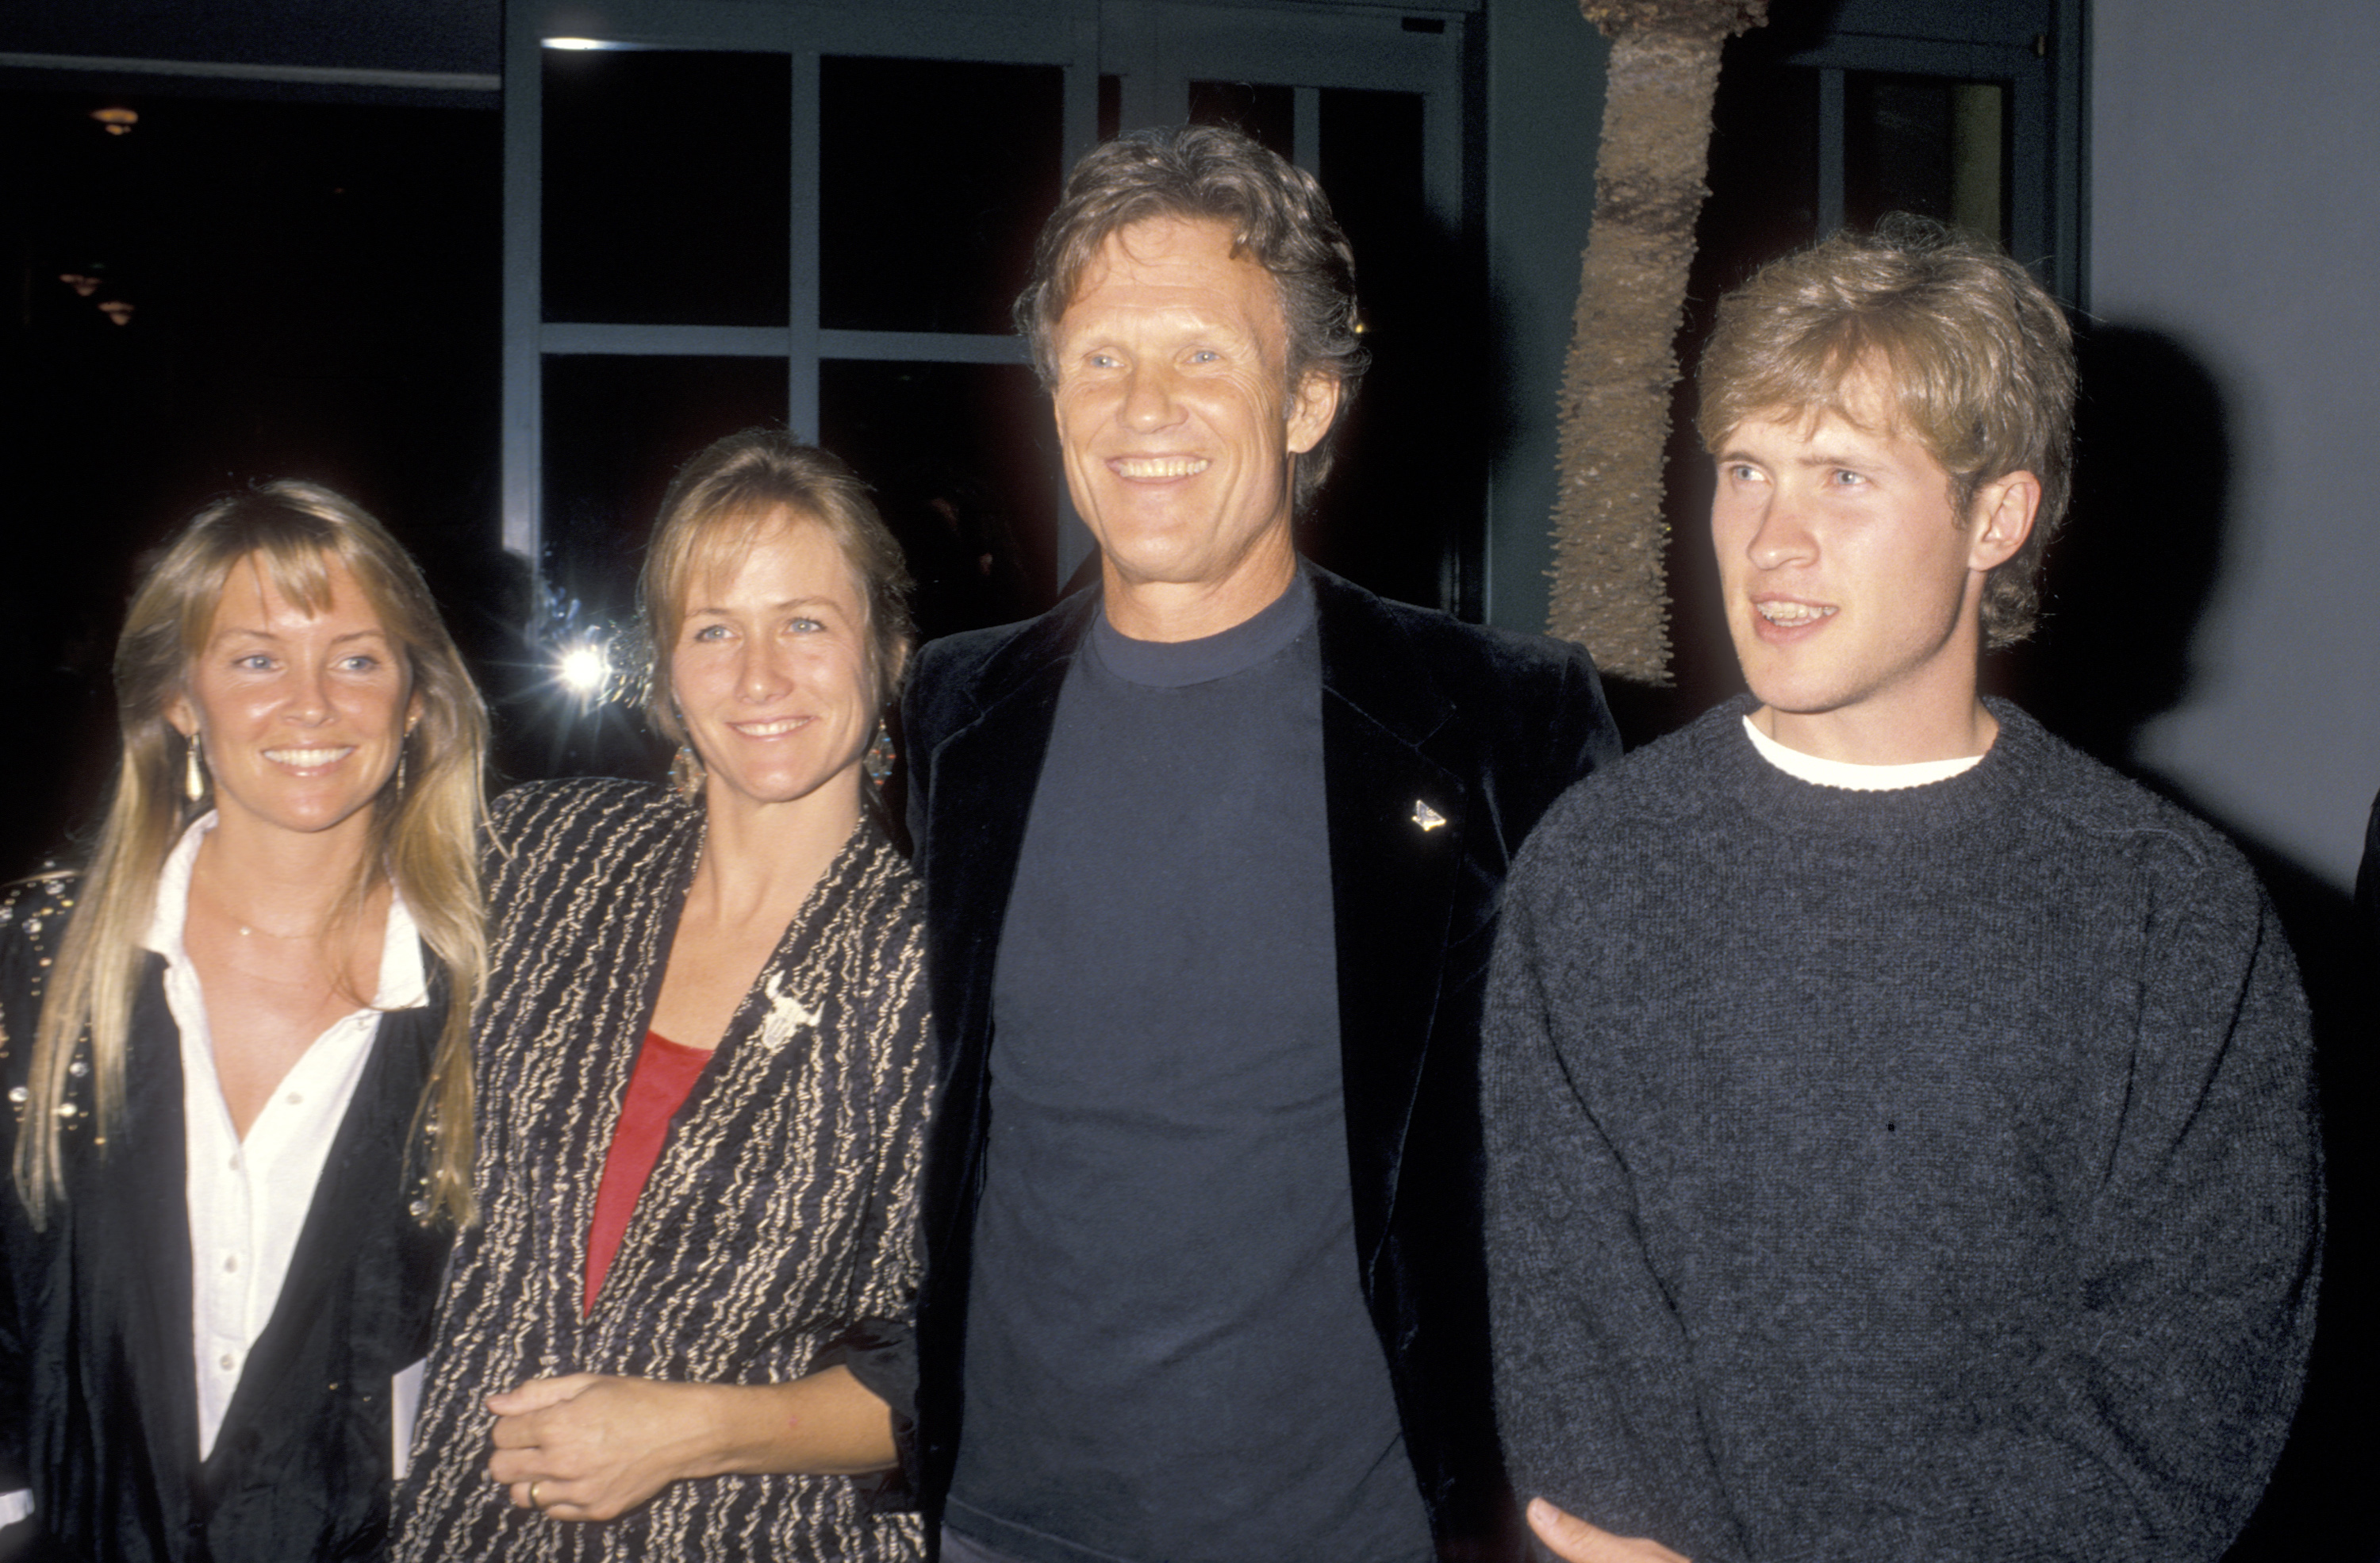 Kris Kristofferson, his wife Lisa Meyers, and his children Tracy and Kris Kristofferson, Jr., attend the Crosby, Stills, Nash & Young Fundraiser Party' on March 31, 1990, at Santa Monica Beach Hotel in Santa Monica, California. | Source: Getty Images